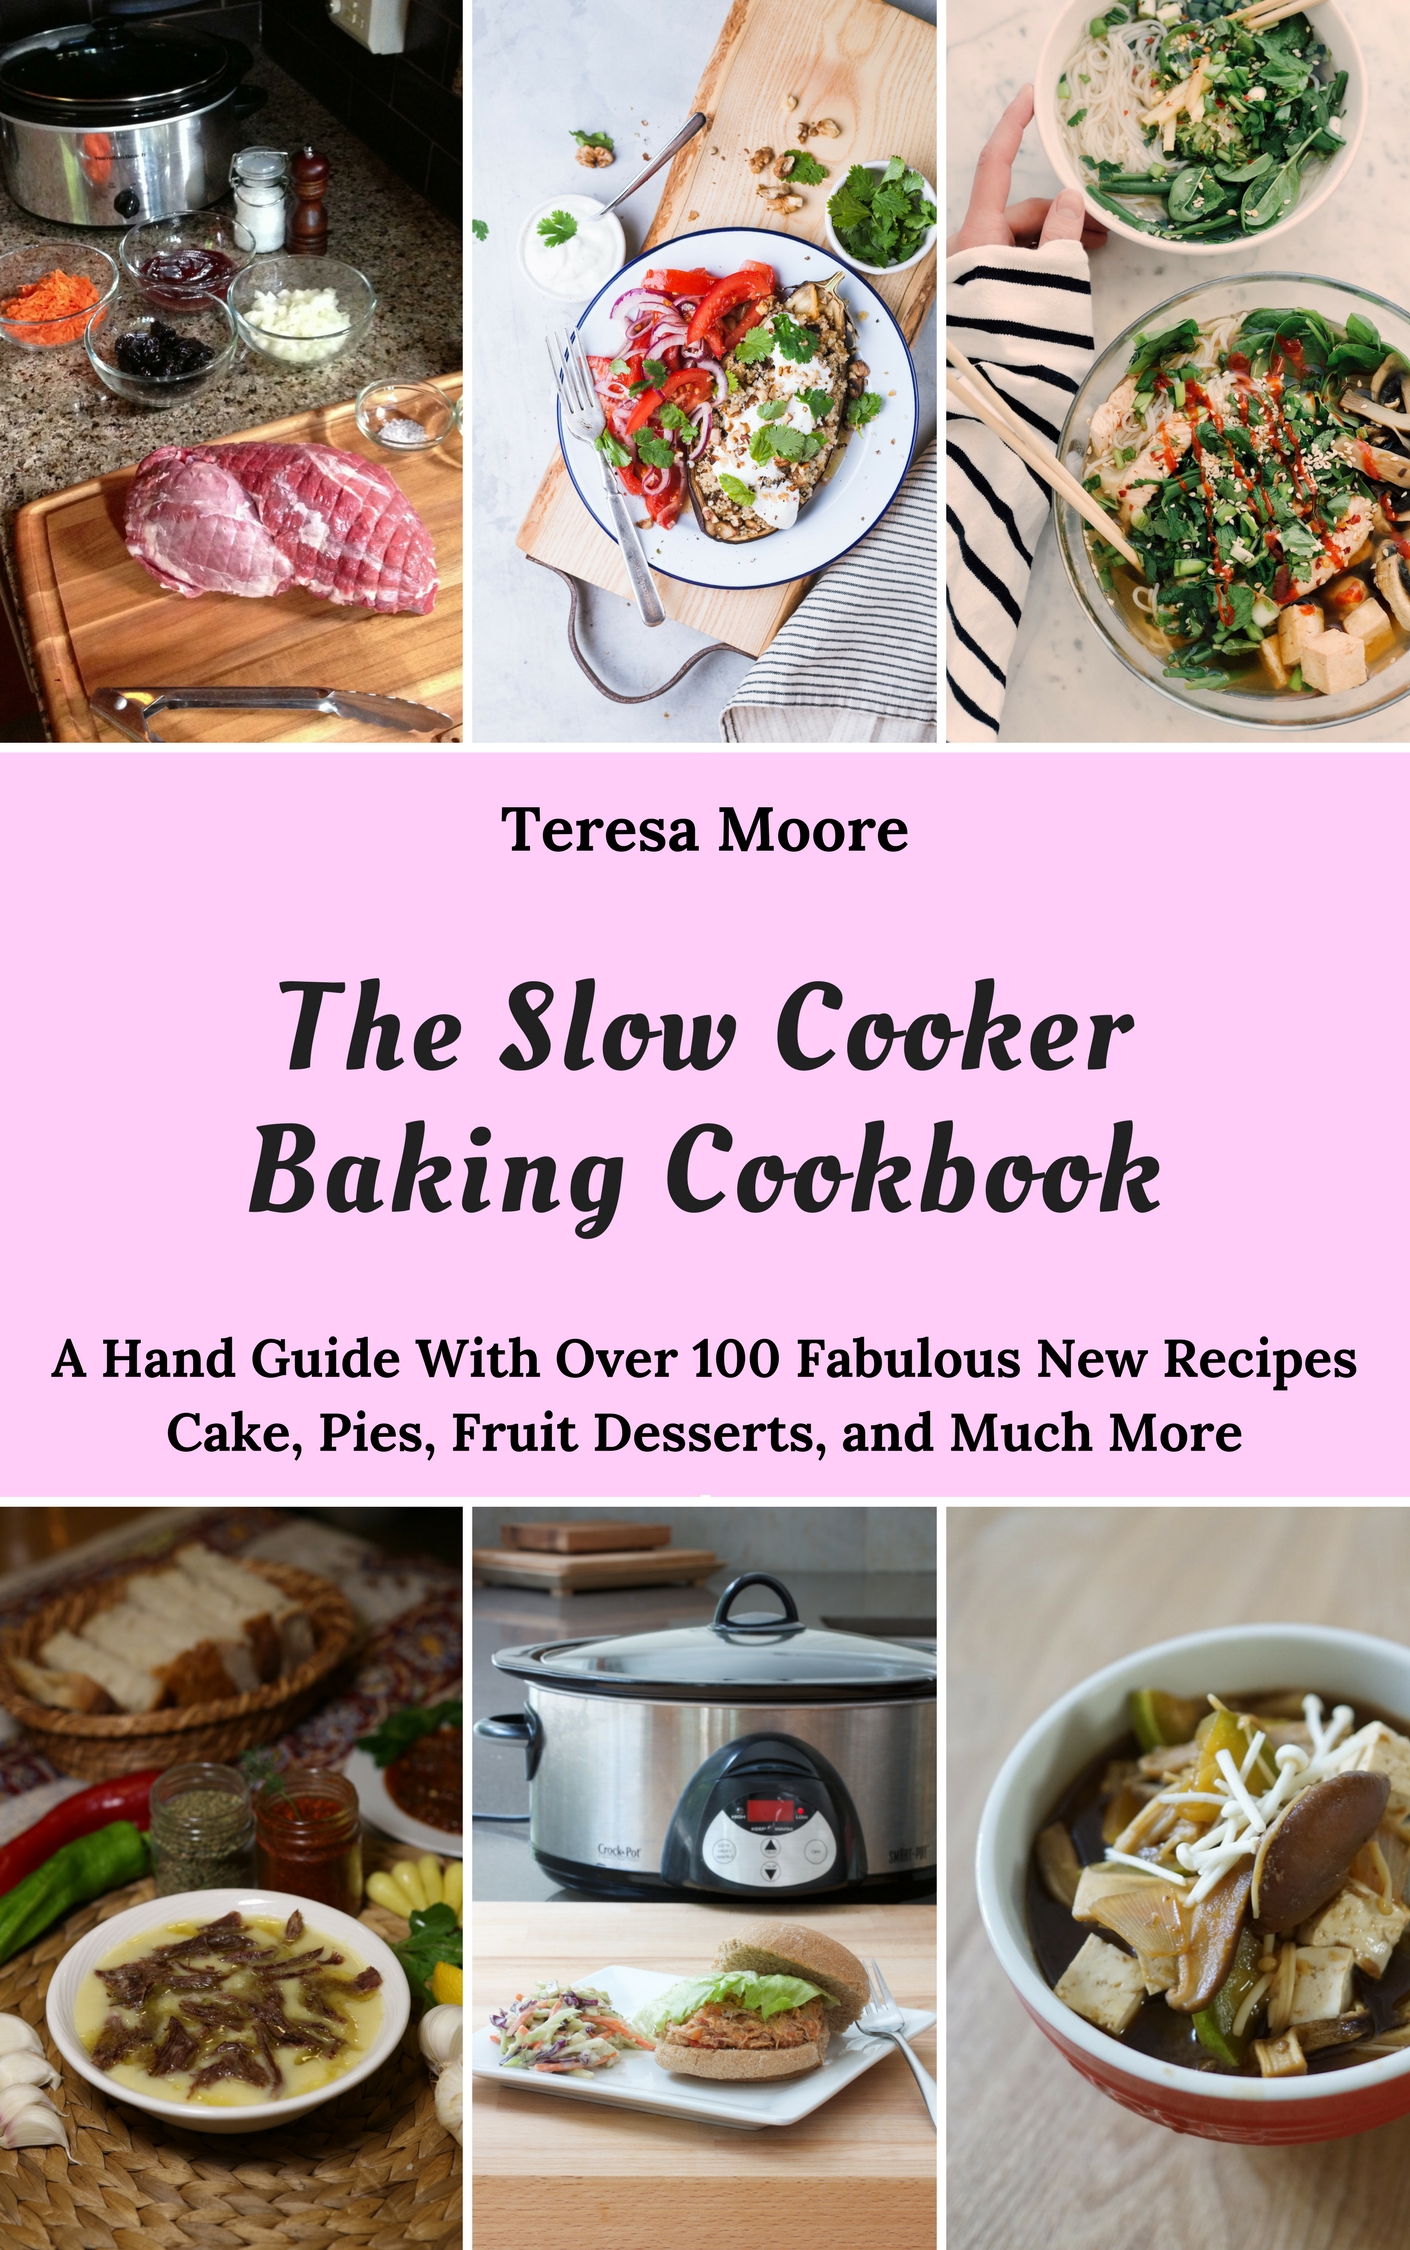 FREE: The Slow Cooker Baking Cookbook: A Hand Guide With Over 100 Fabulous New Recipes Cake, Pies, Fruit Desserts, and Much More by Teresa Moore